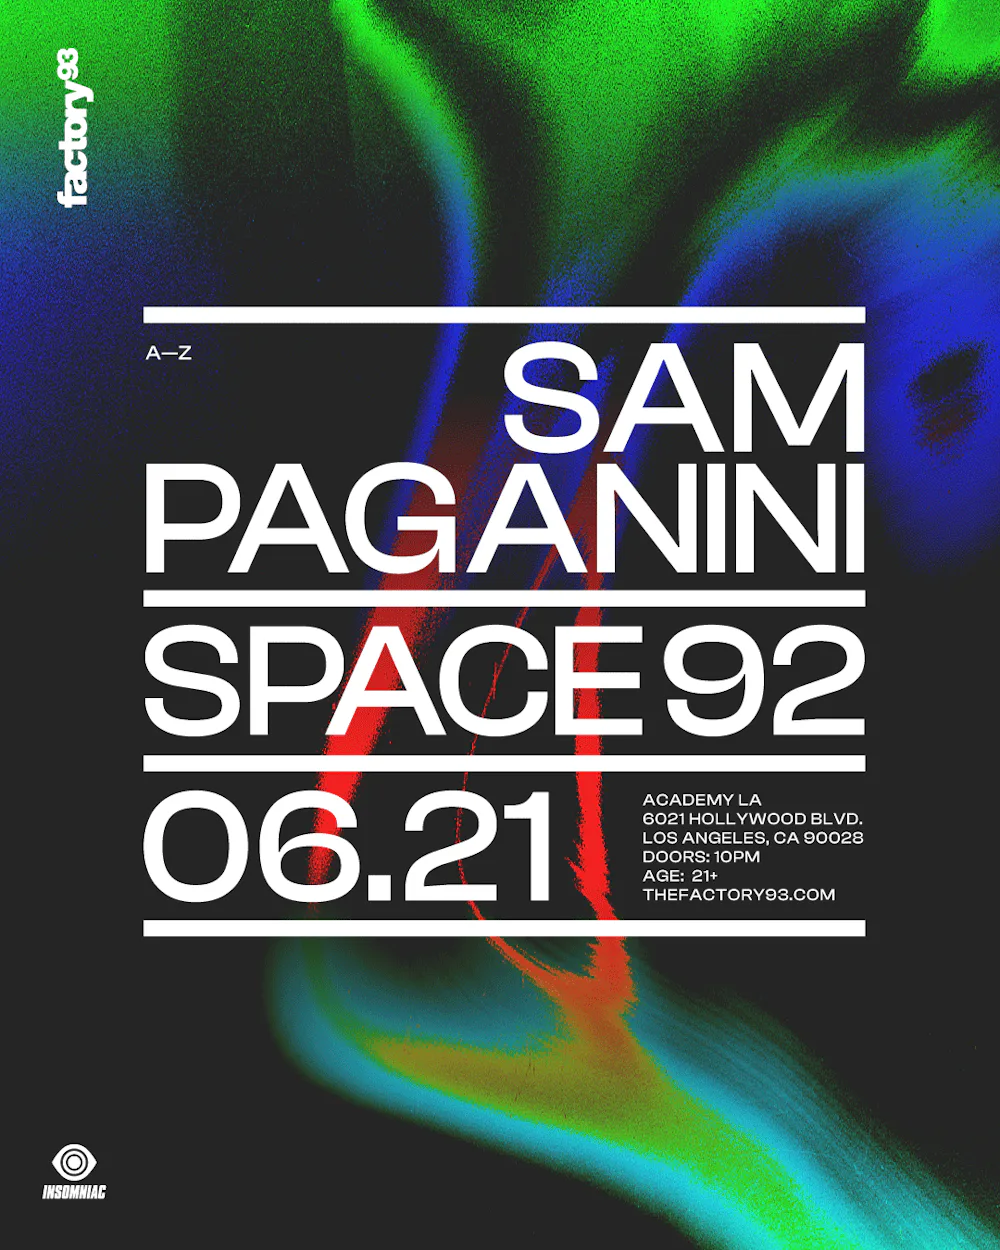 Factory 93 presents  SAM PAGANINI AND SPACE 92